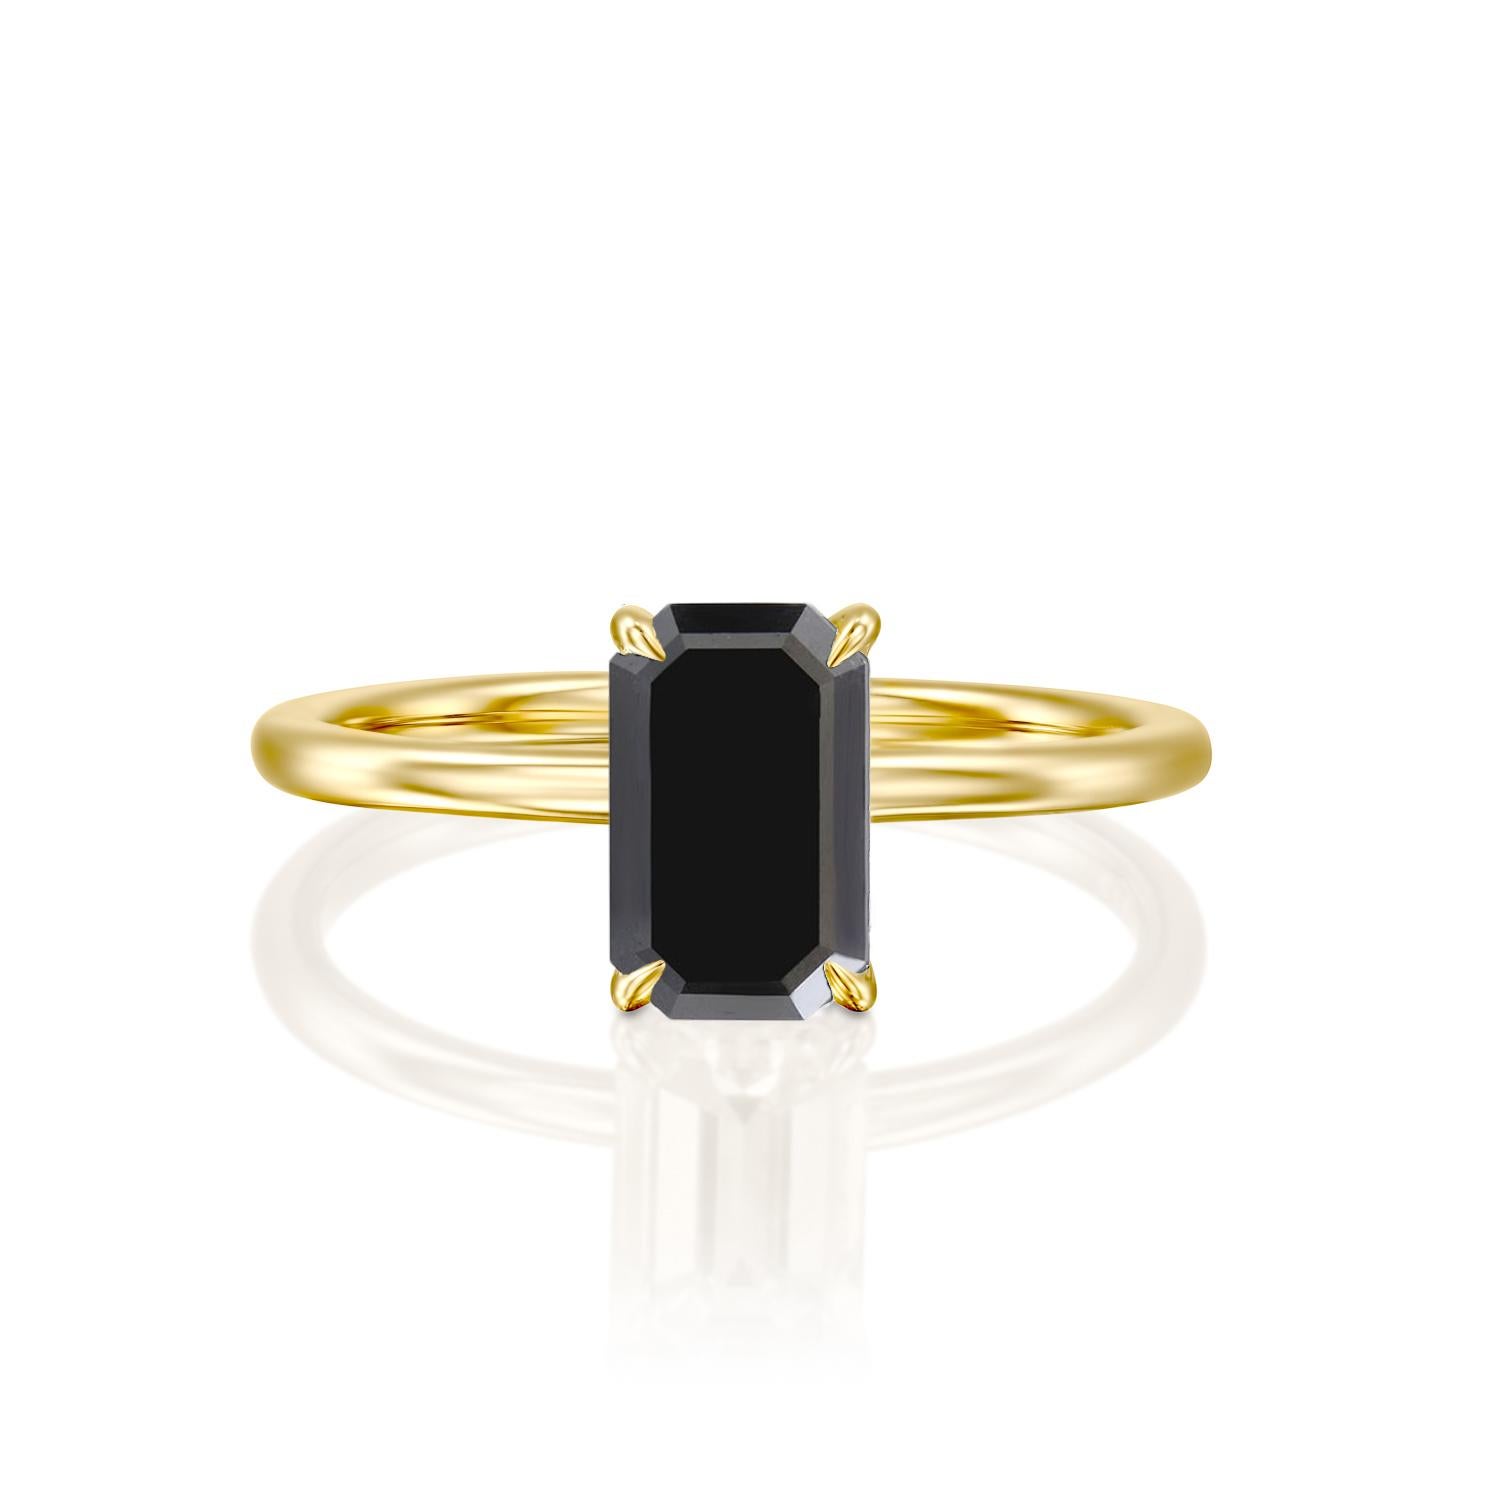 Beautiful minimalistic black diamond engagement ring ring. Center stone is of 1.5 carat, natural, emerald shaped, AAA quality Black diamond. Set in a sleek, 14K yellow gold, solitaire ring with a 4-prong setting. The setting looks delicate but is